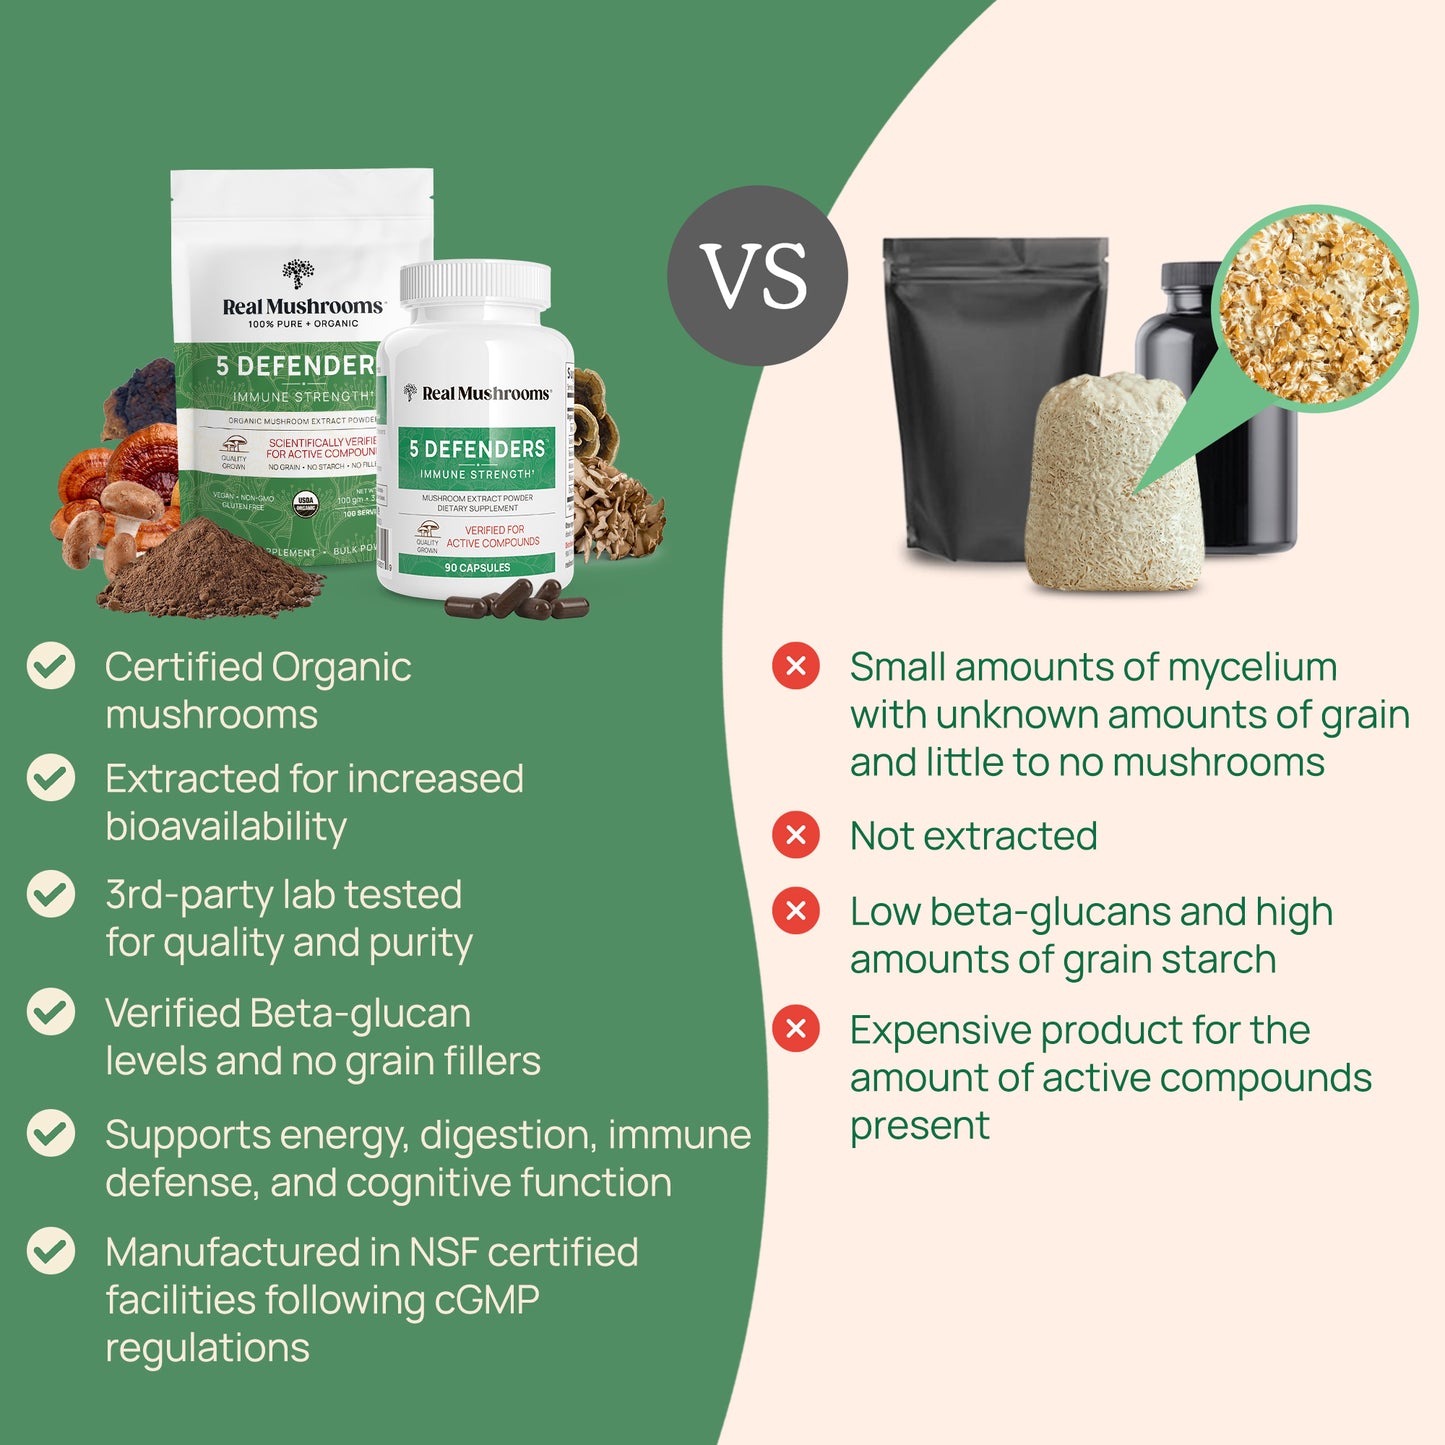 Certified organic vs non-certified organic: A comparison between the benefits of Real Mushrooms' 5 Defenders for Pets – Bulk Powder and mushrooms.